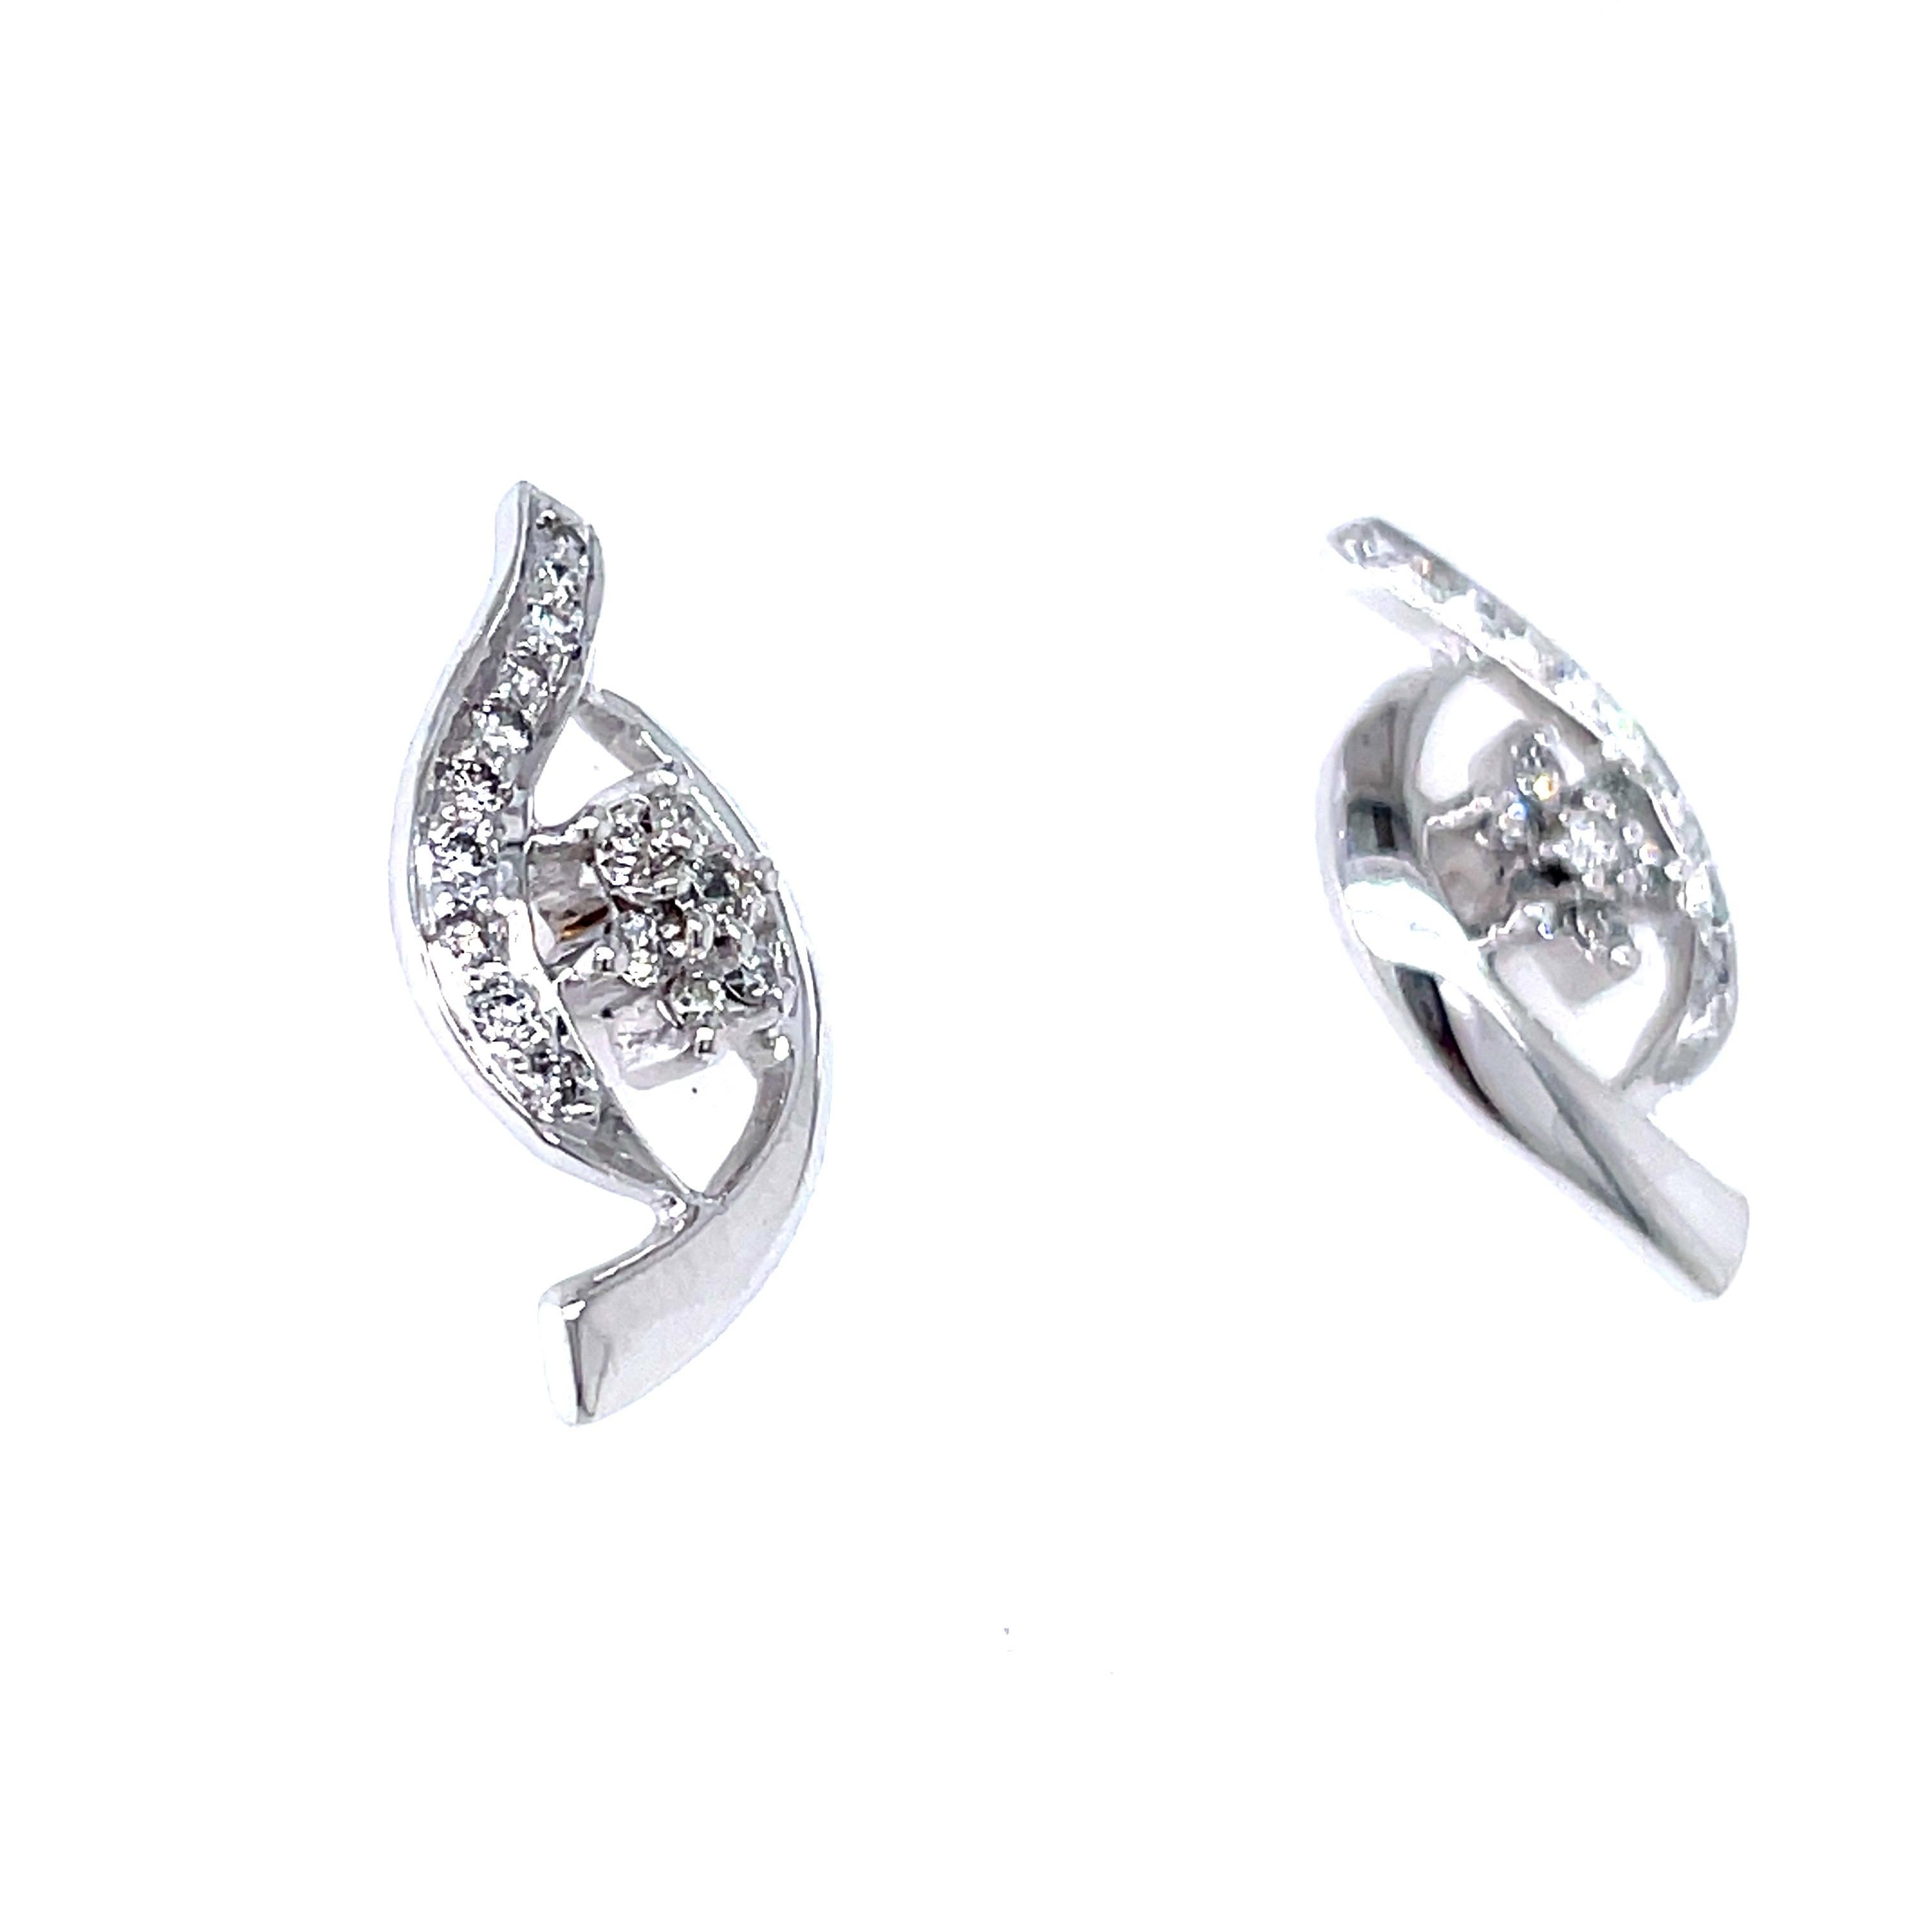 Contemporary 18k White Gold Twist Design Earrings With Diamonds For Sale